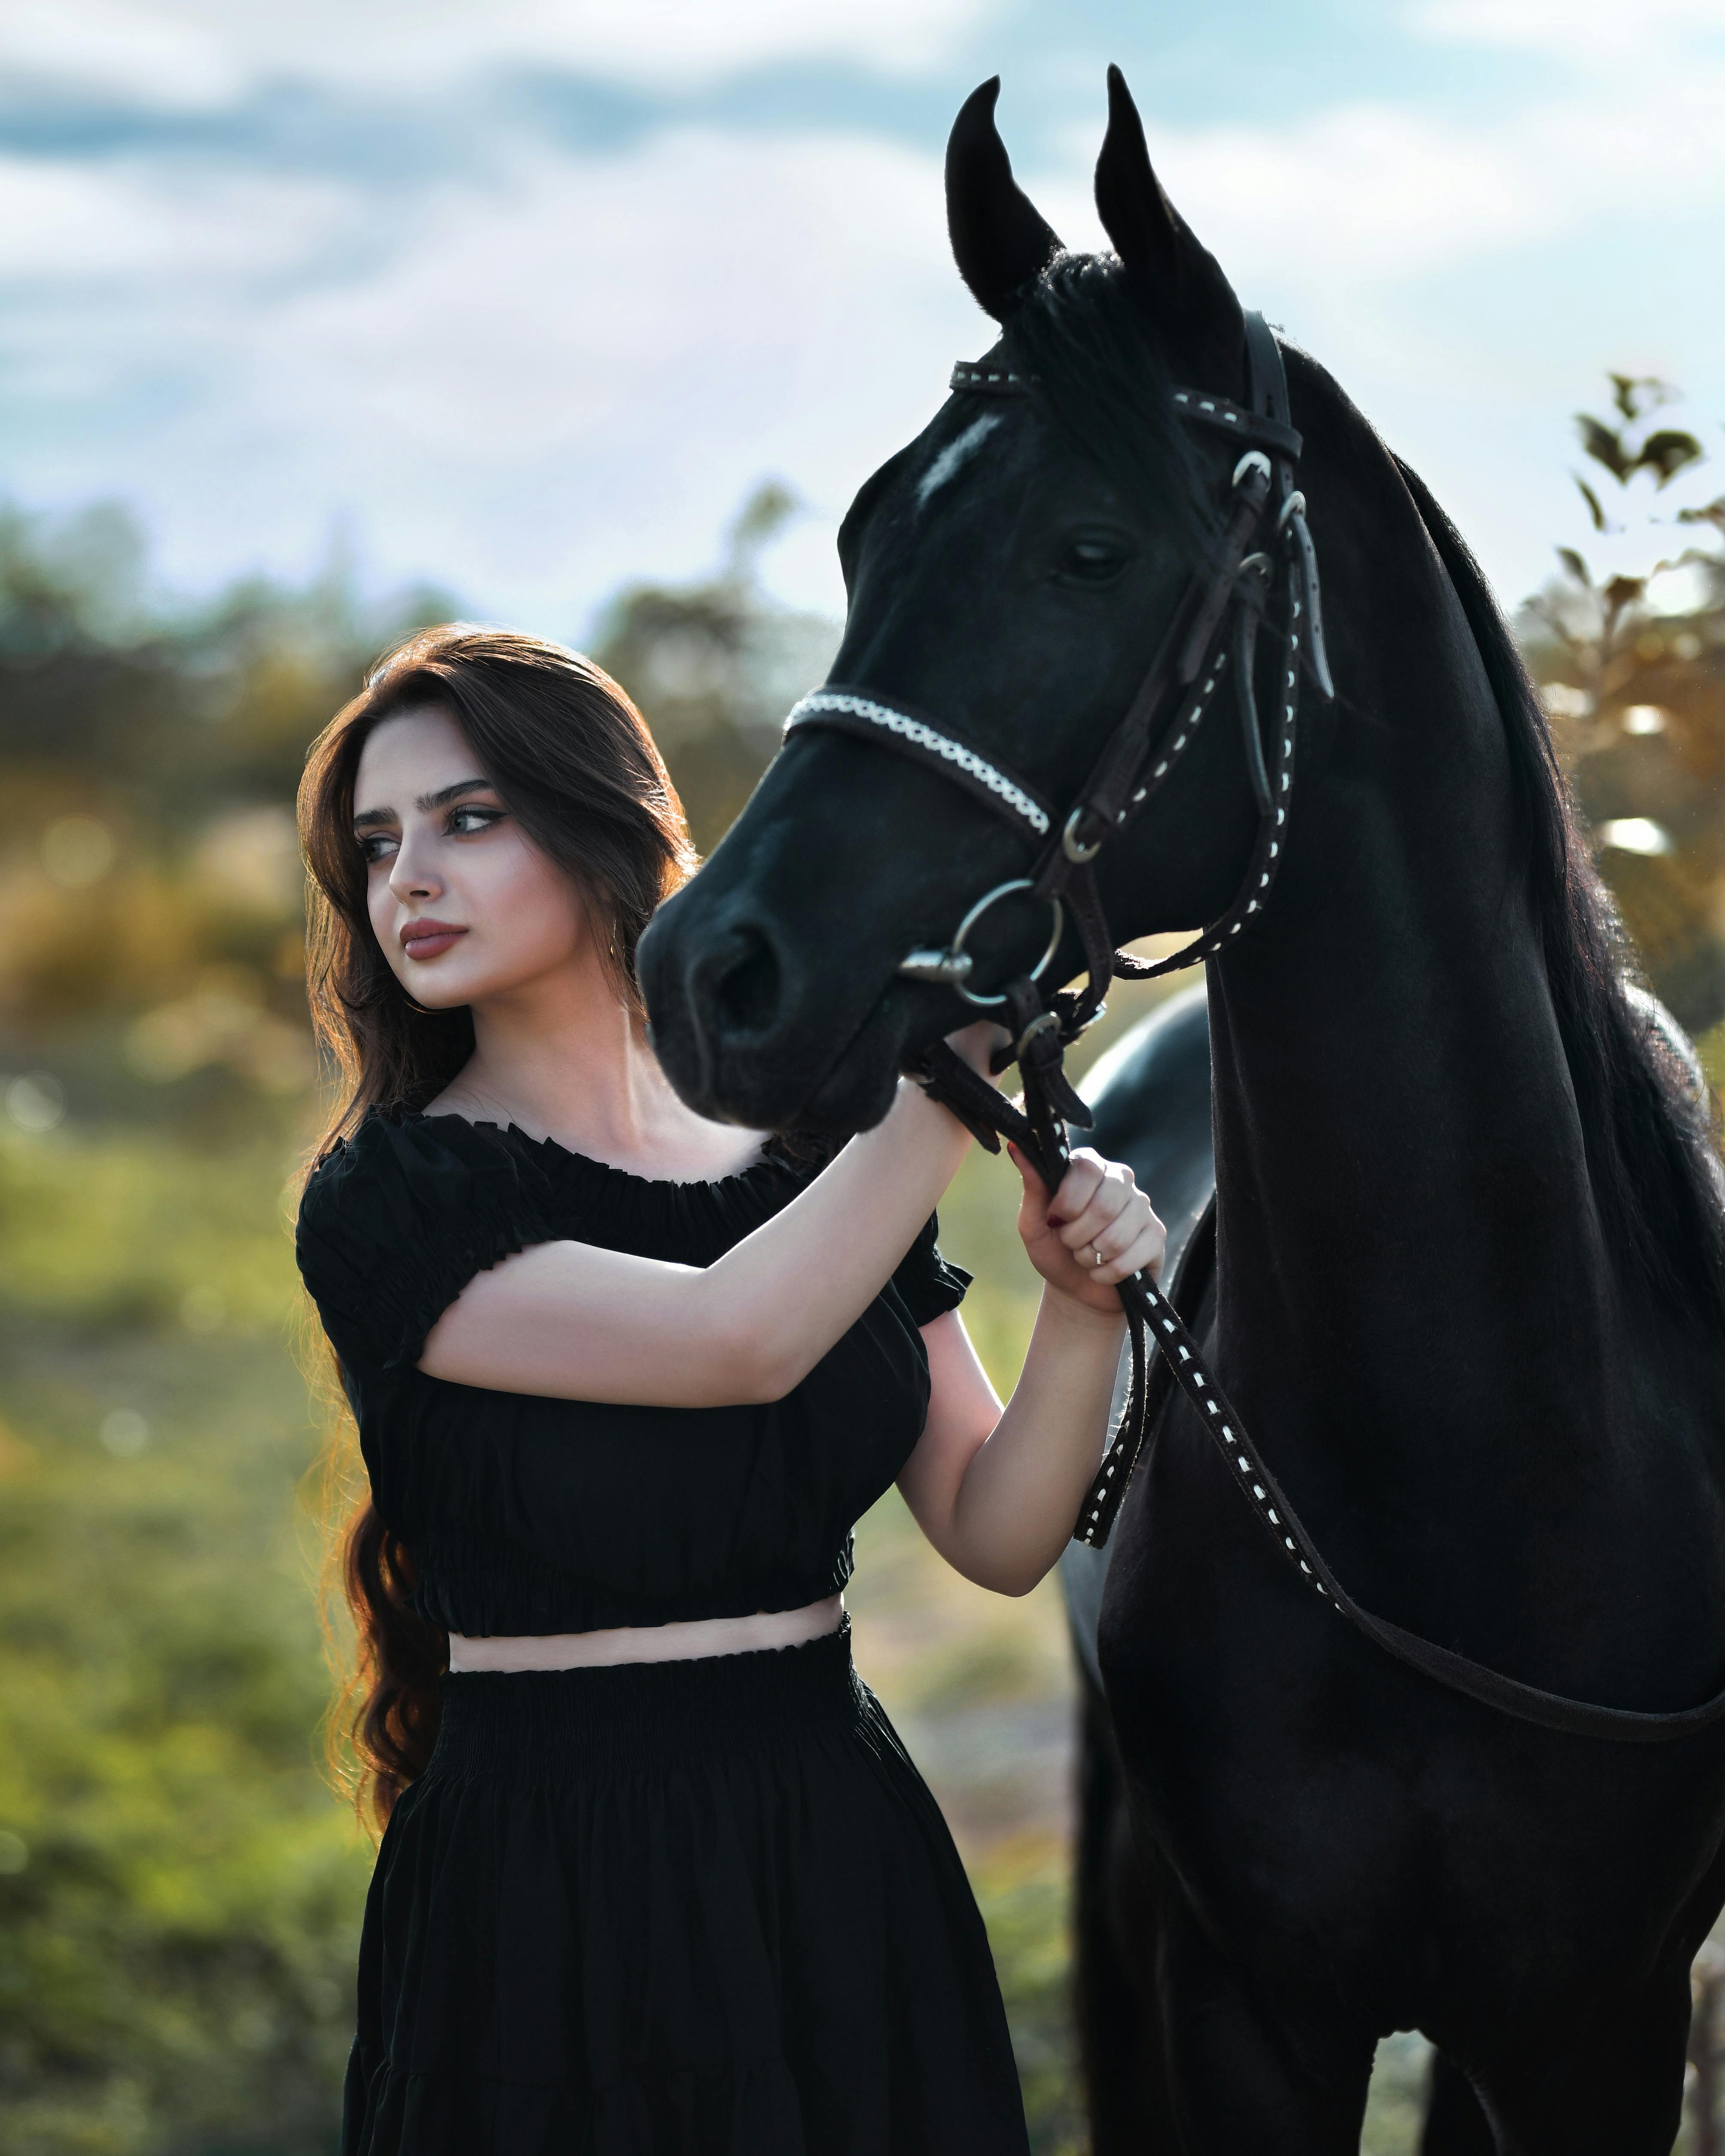 Woman in Black Dress Holding the Black Horse · Free Stock Photo